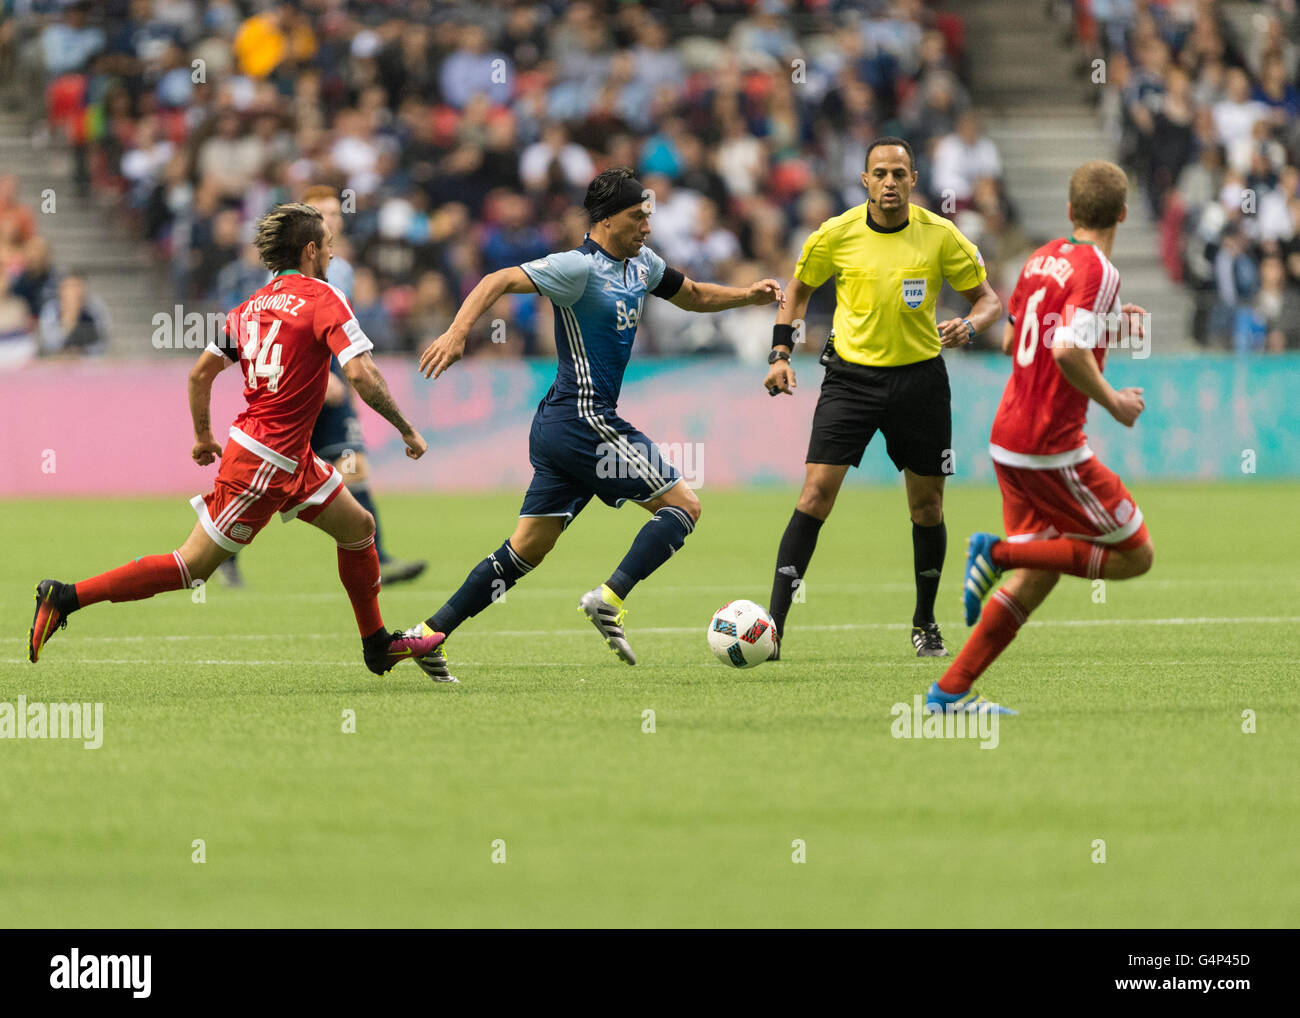 Vancouver, Canada. 18 June, 2016. Vancouver Whitecaps midfielder Christian Bolanos (7) with the ball. Vancouver Whitecaps vs New England Revolution, BC Place Stadium.  Final Score New England wins 2-1. Credit:  Gerry Rousseau/Alamy Live News Stock Photo